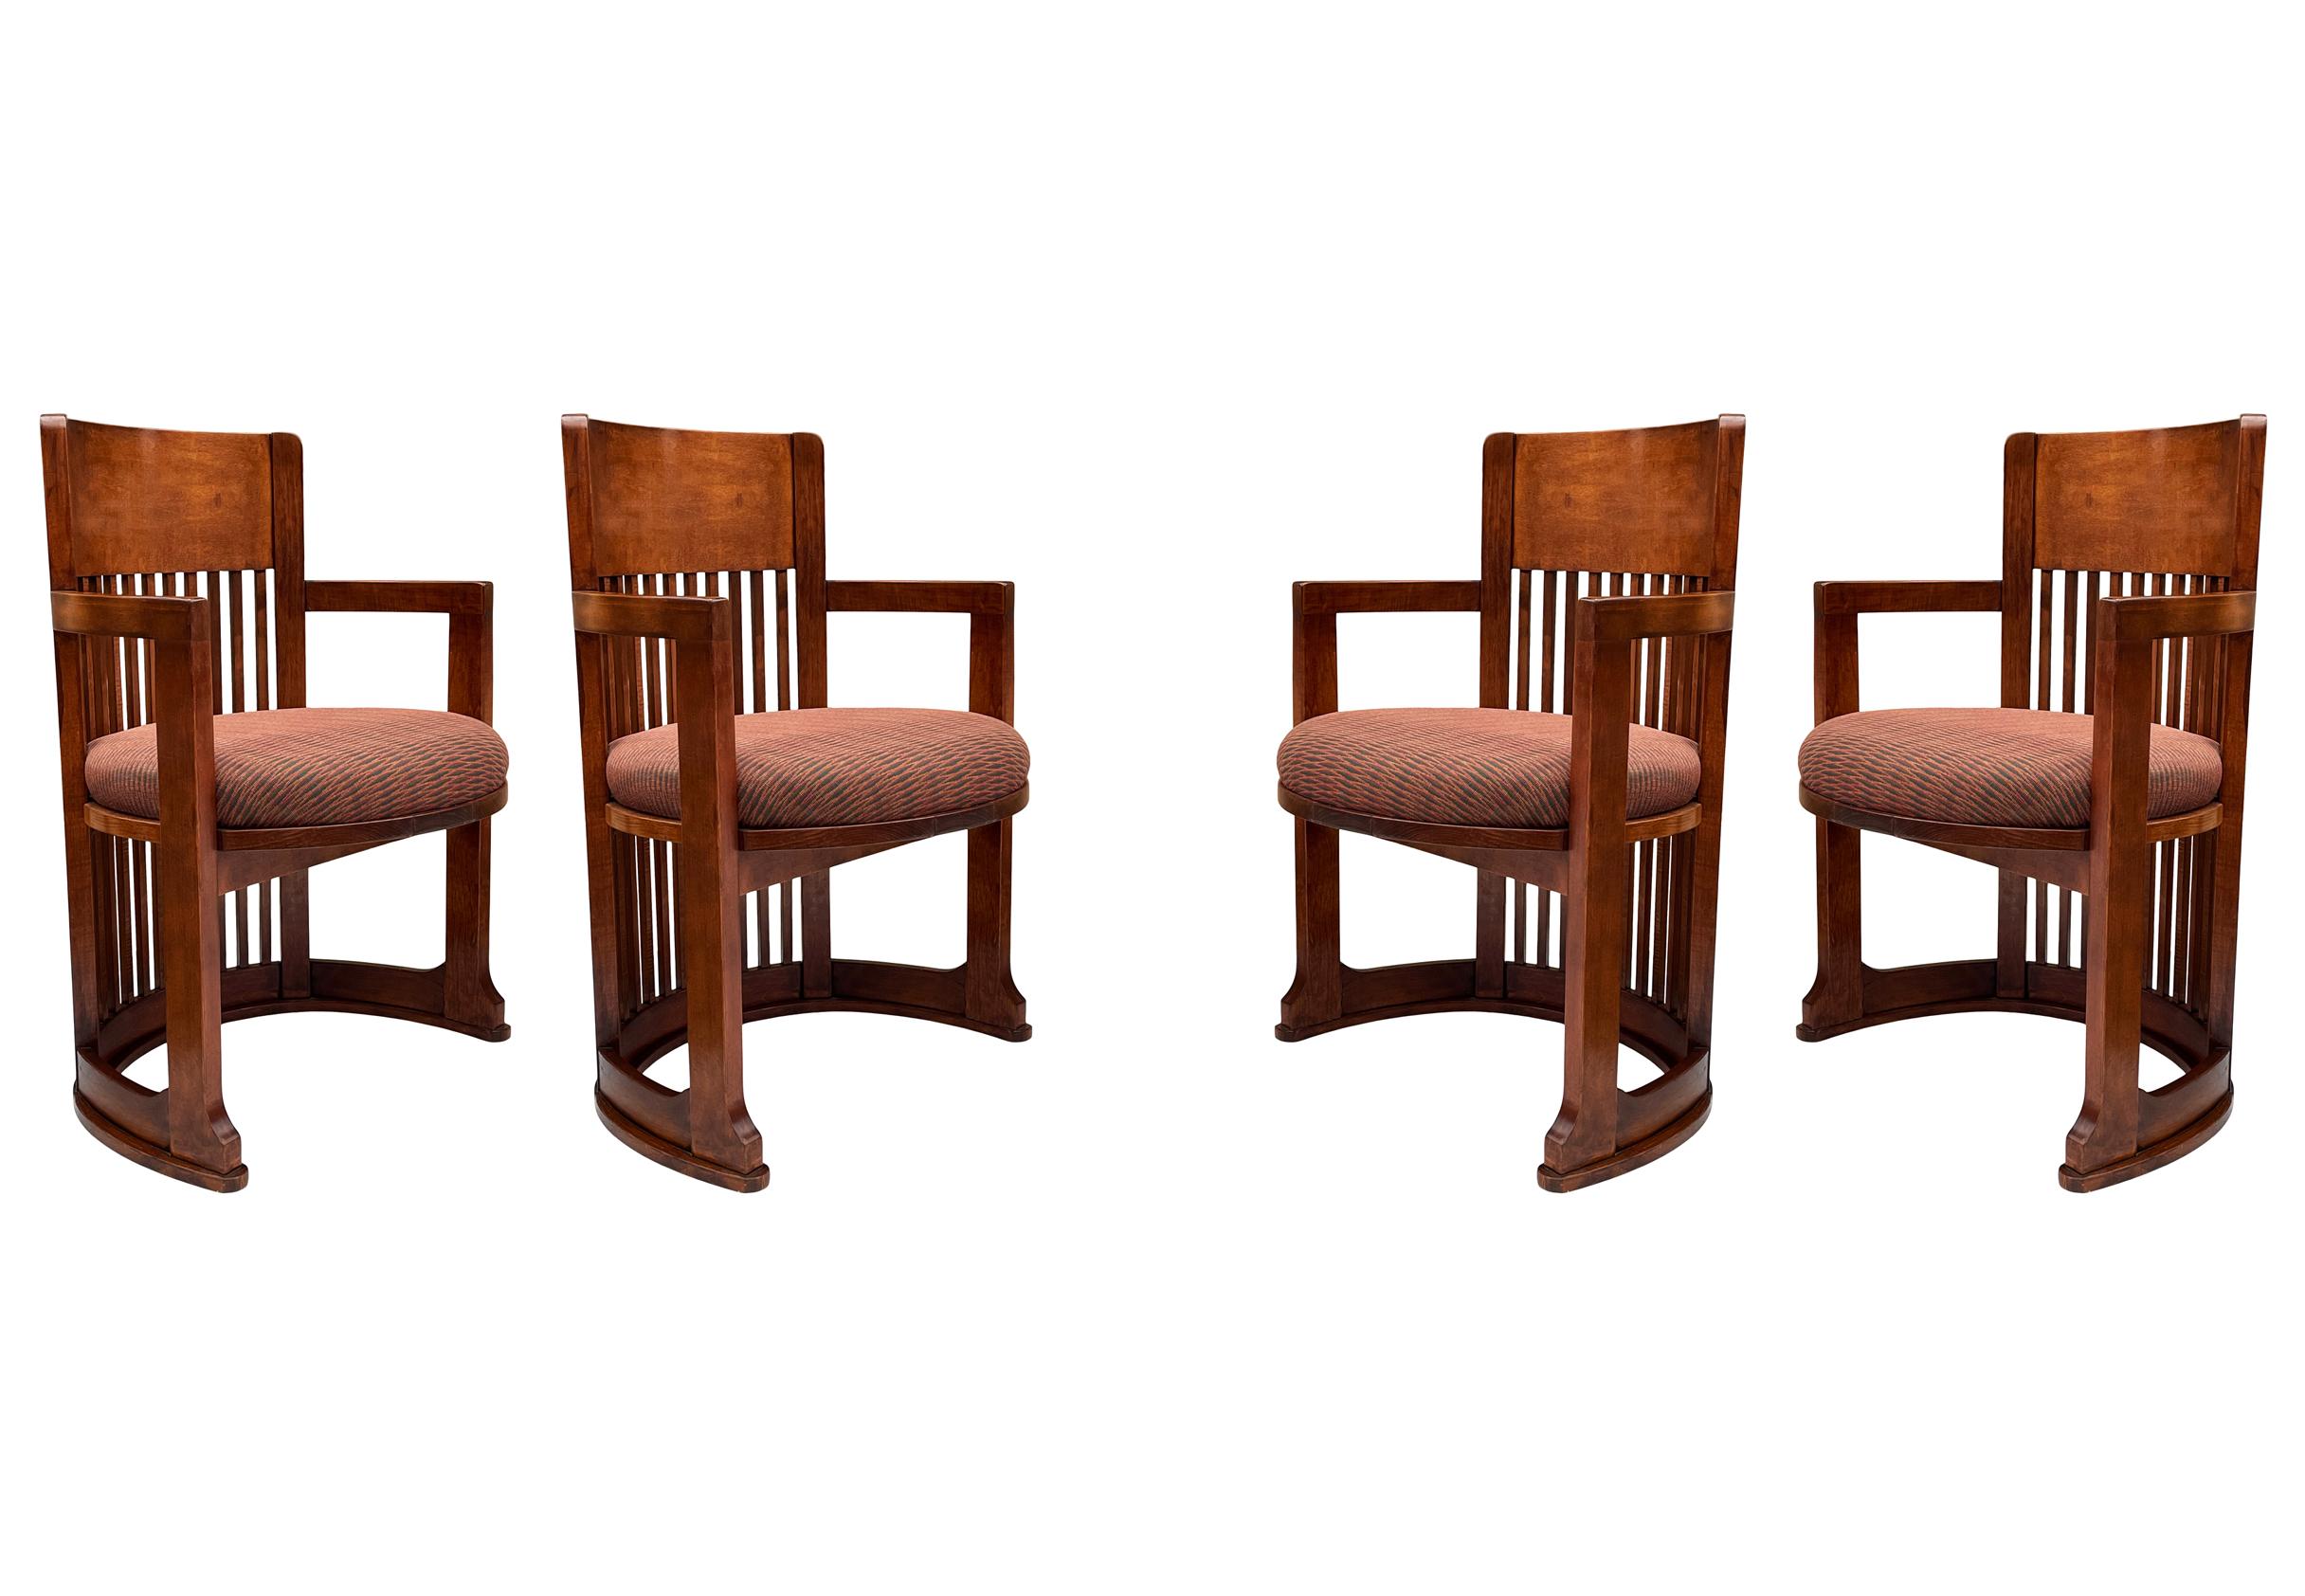 American Mid-Century Modern Spindle Barrel Back Dining Chairs after Frank Lloyd Wright